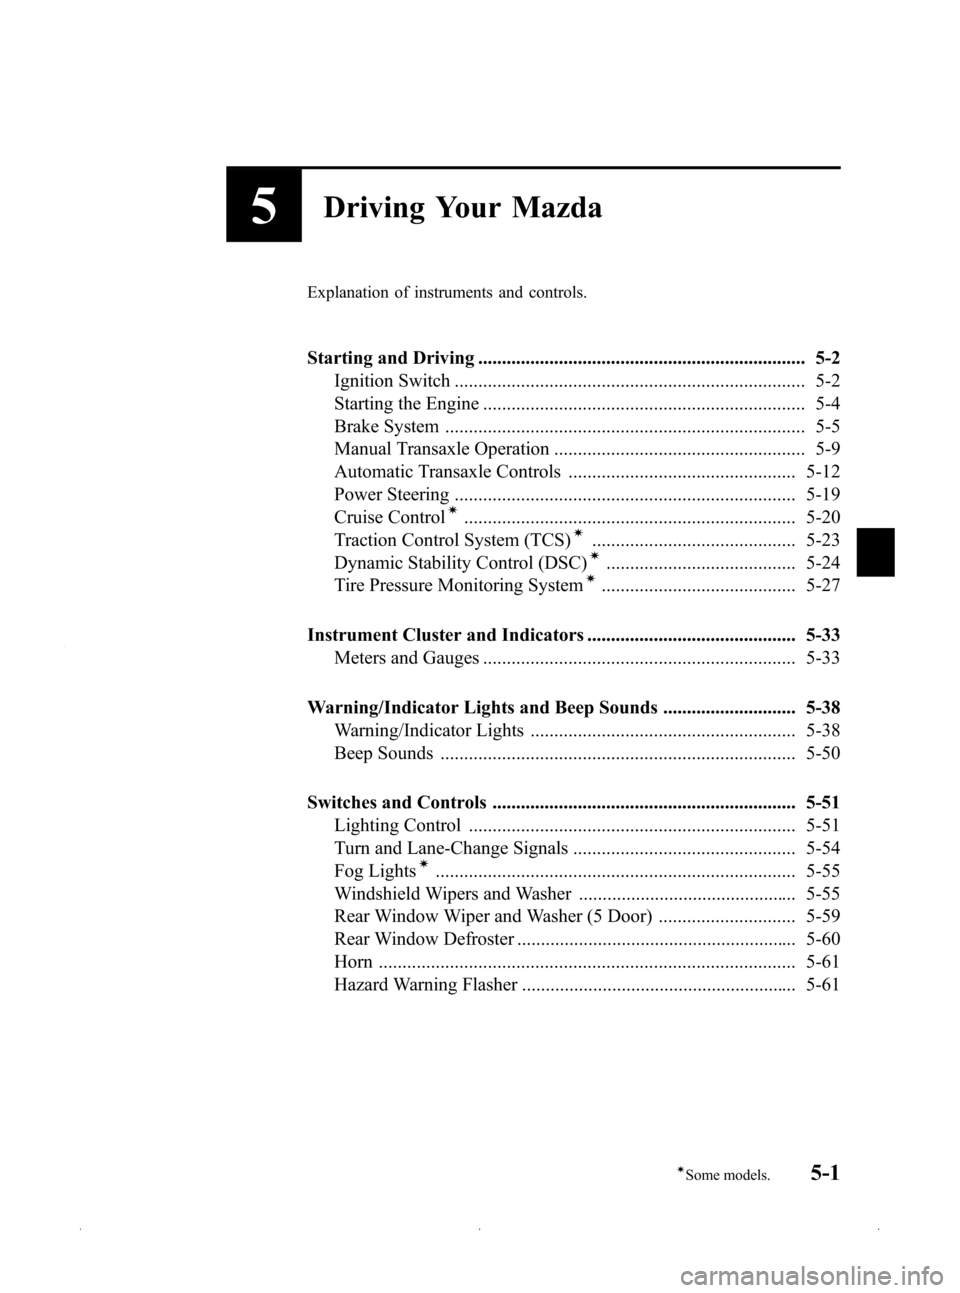 MAZDA MODEL 3 HATCHBACK 2009  Owners Manual (in English) Black plate (123,1)
5Driving Your Mazda
Explanation of instruments and controls.
Starting and Driving ..................................................................... 5-2Ignition Switch .........